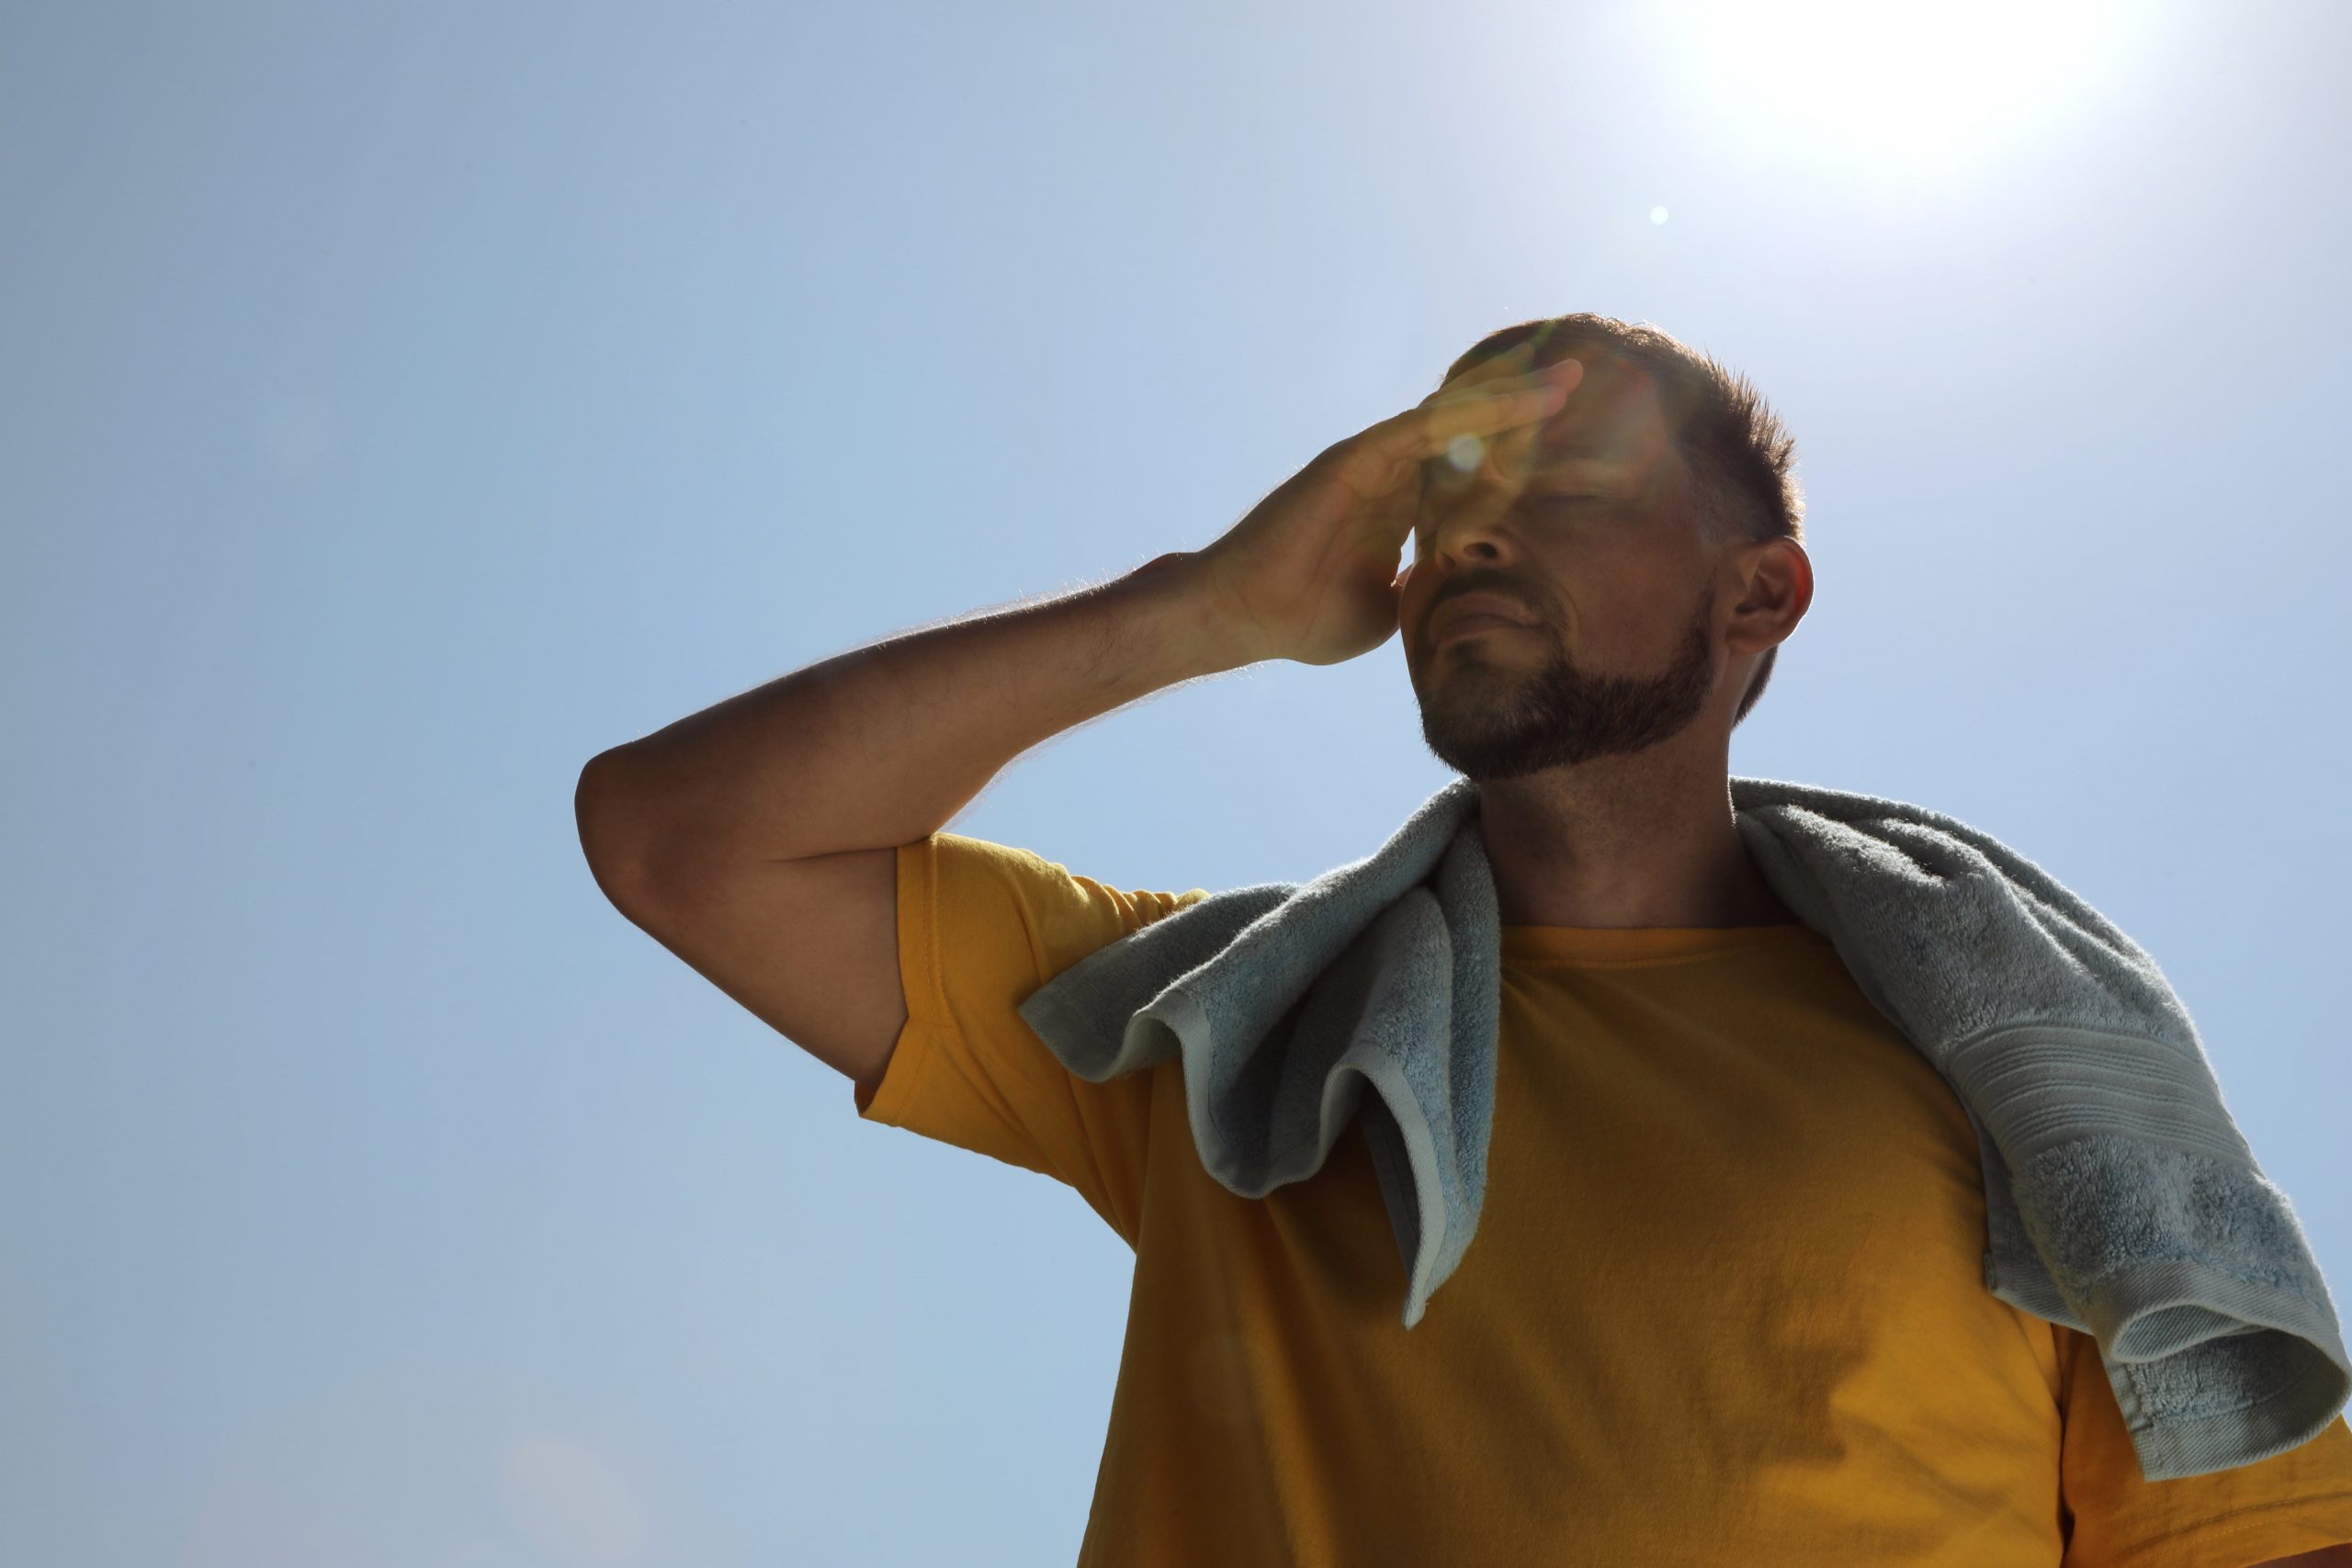 Heat Stress Prevention and Safety Training